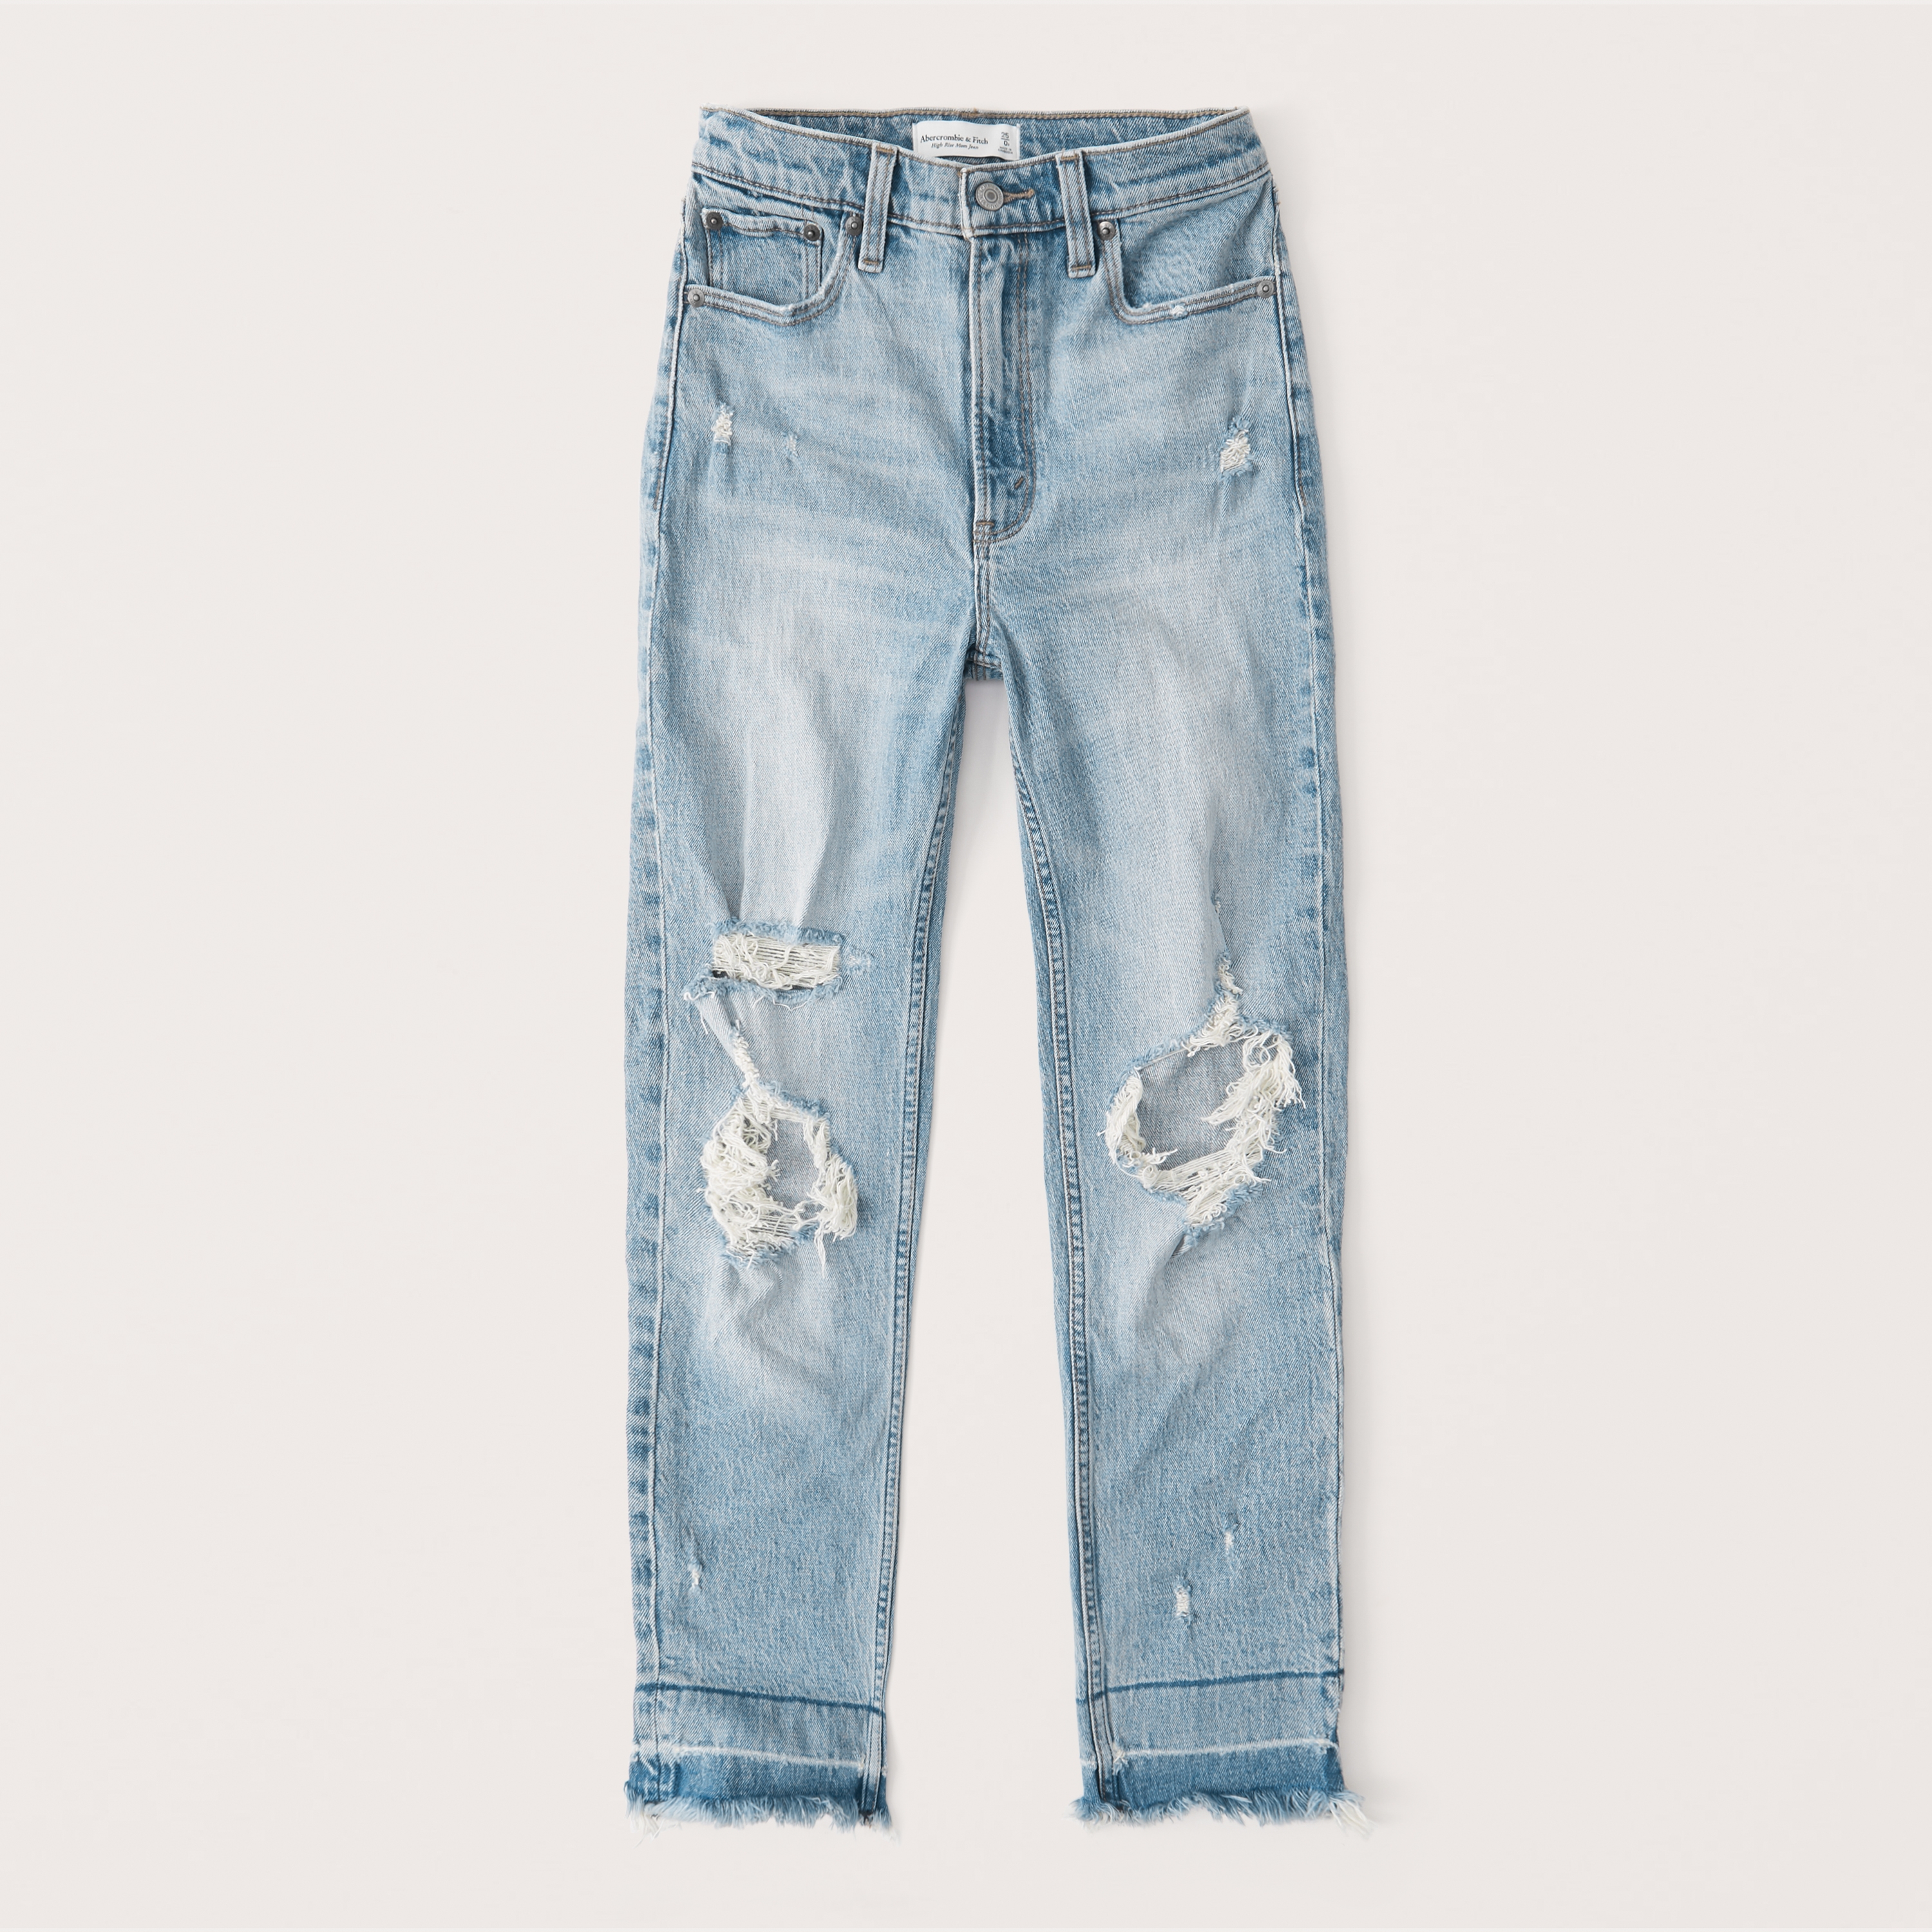 a&f mom jeans review